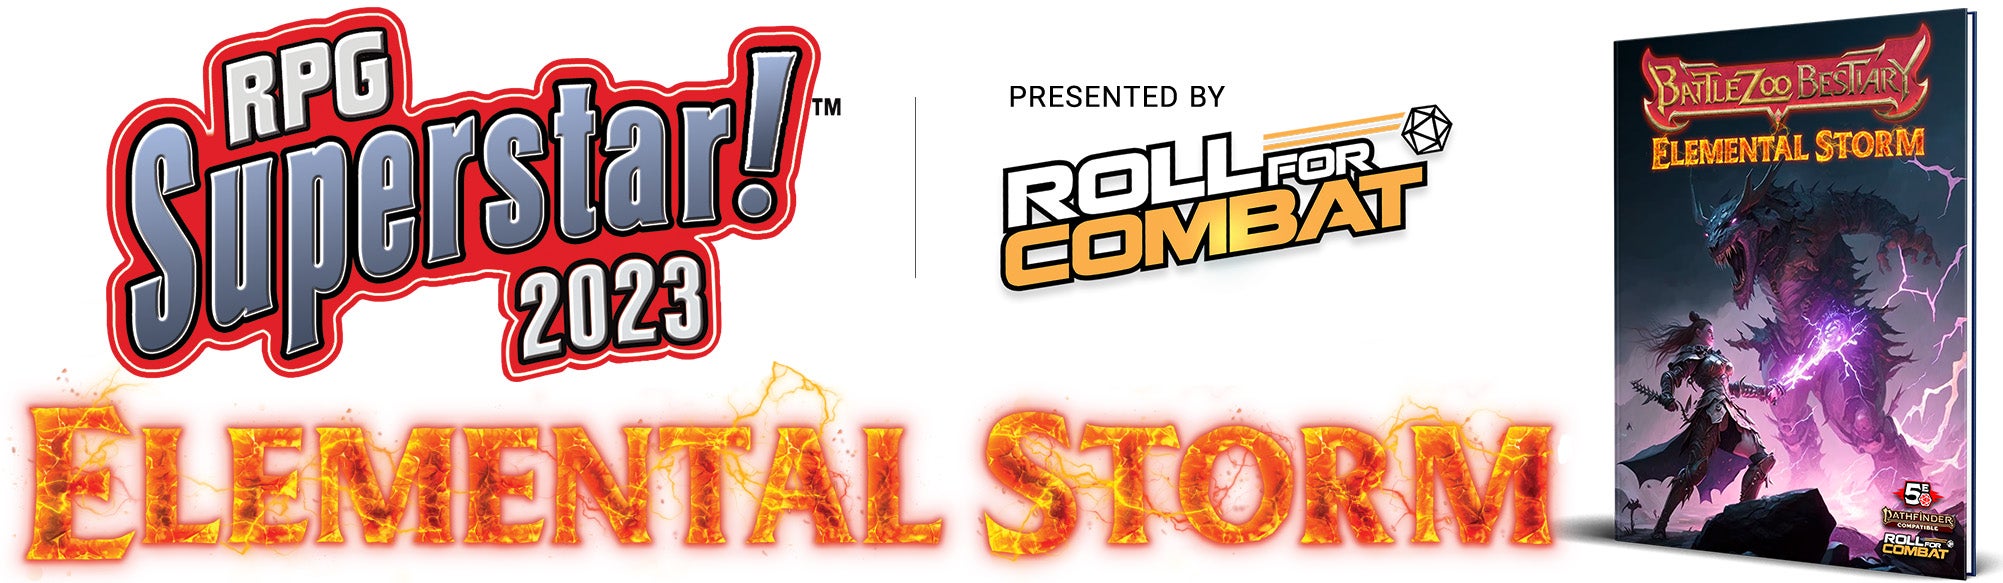 RPG Superstar! 2023: Elemental Storm. Presented by Roll for Combat